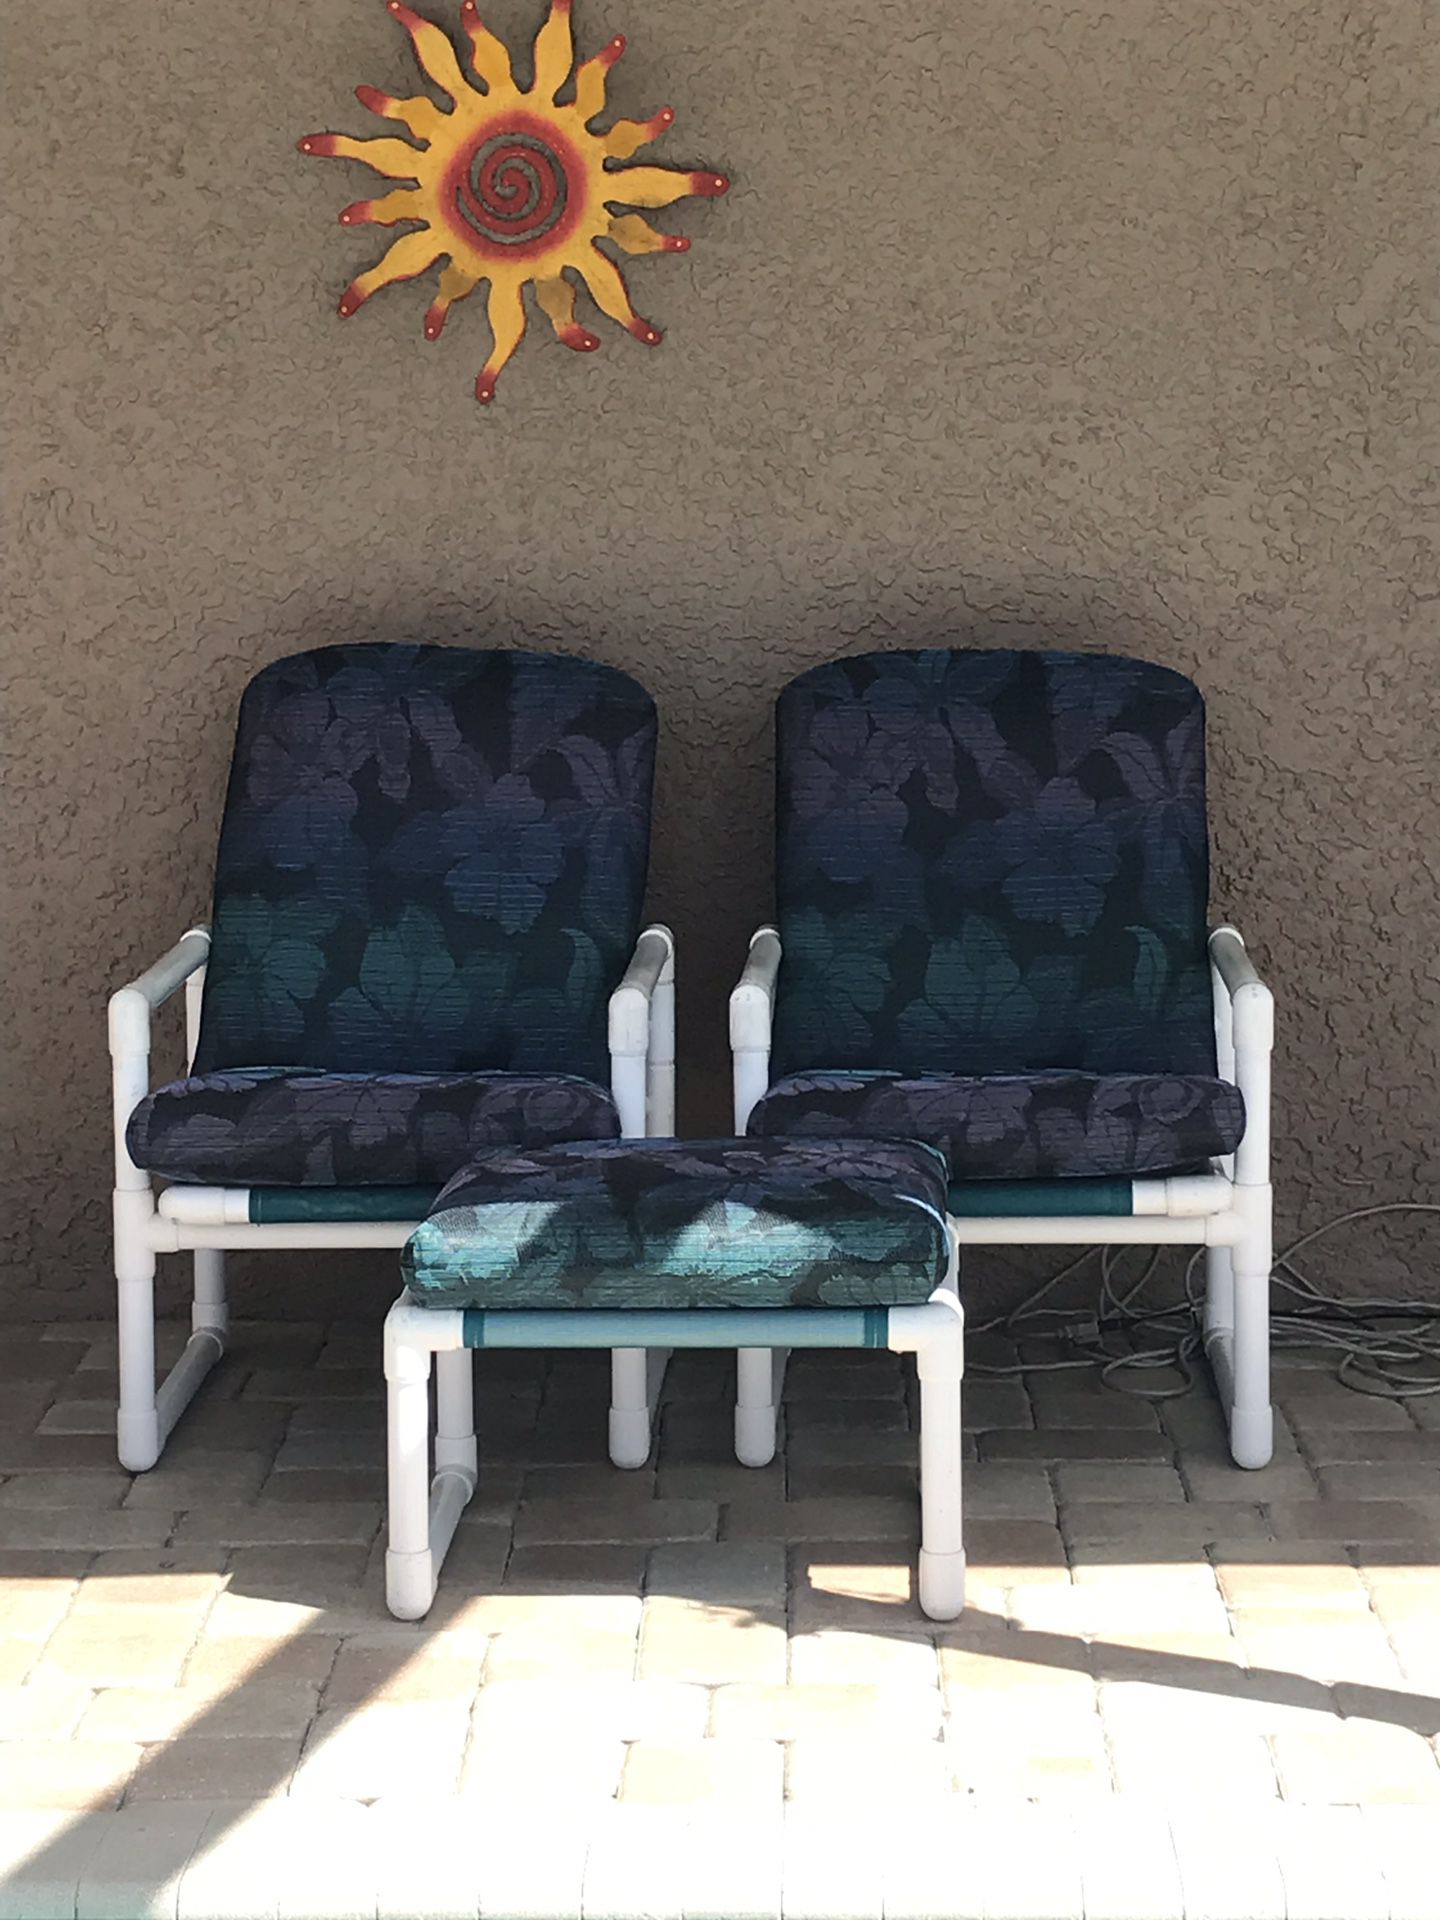 Lightweight PVC Patio Chairs and Ottoman